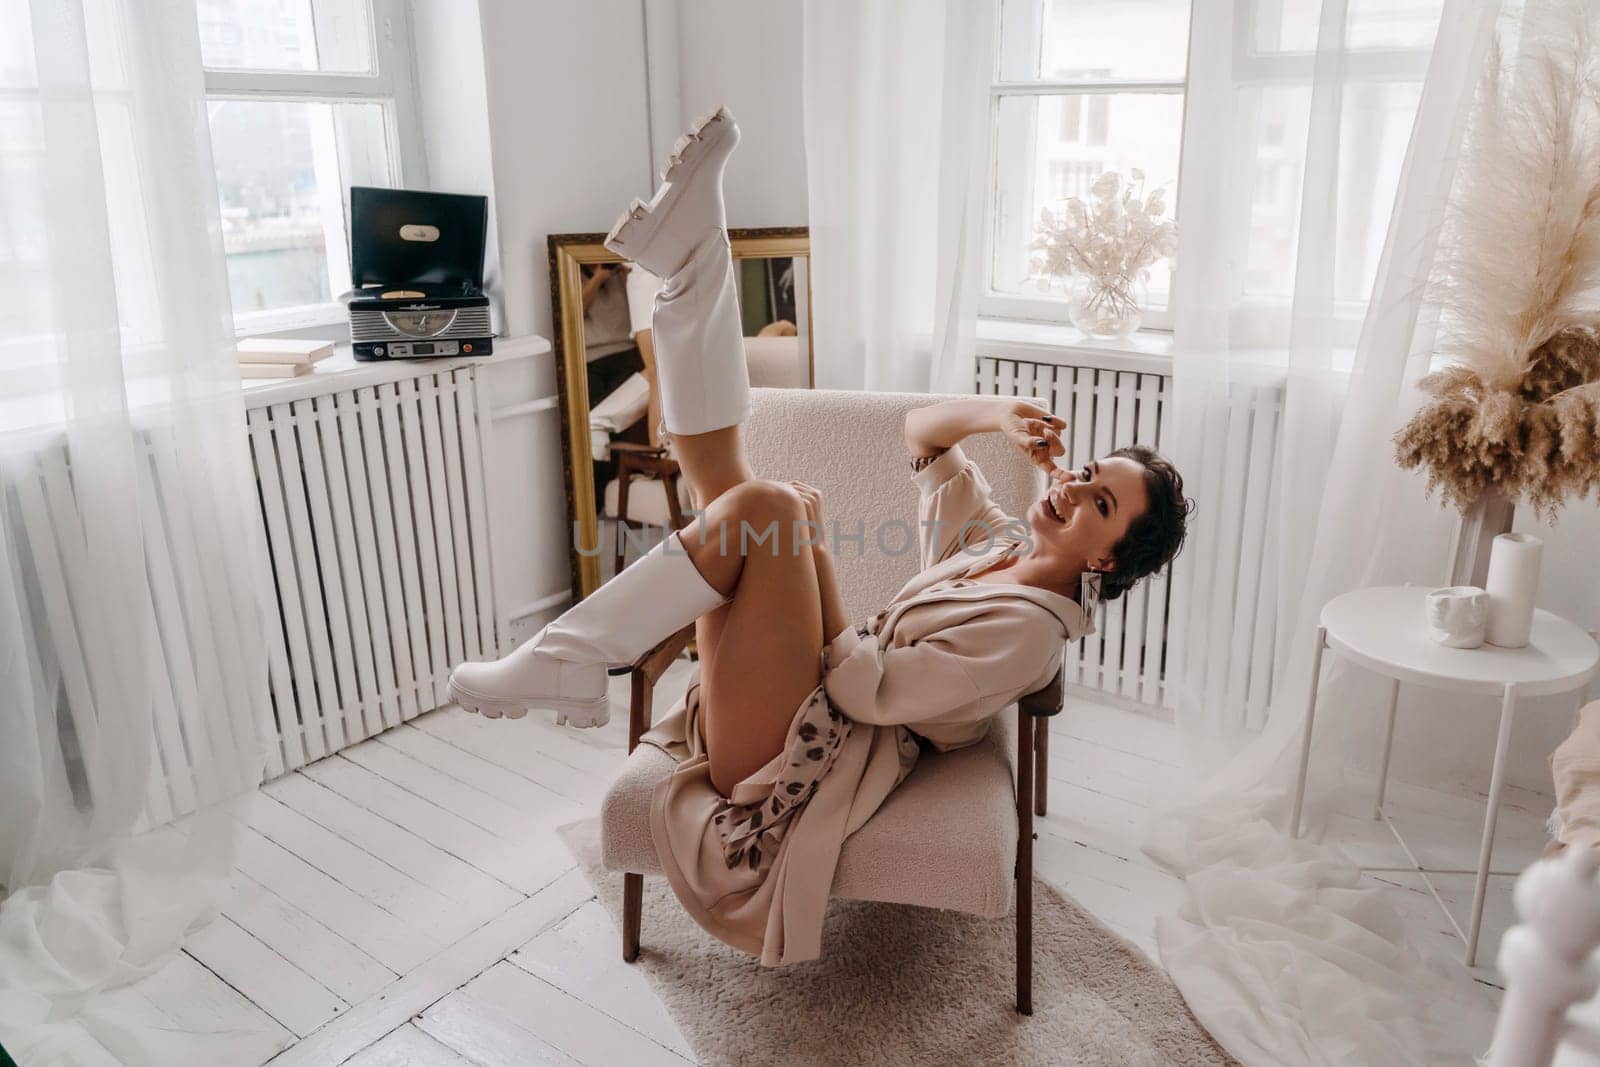 A woman is sitting in a chair with her legs spread apart. She is wearing white boots and a white dress. The room is decorated with a white color theme